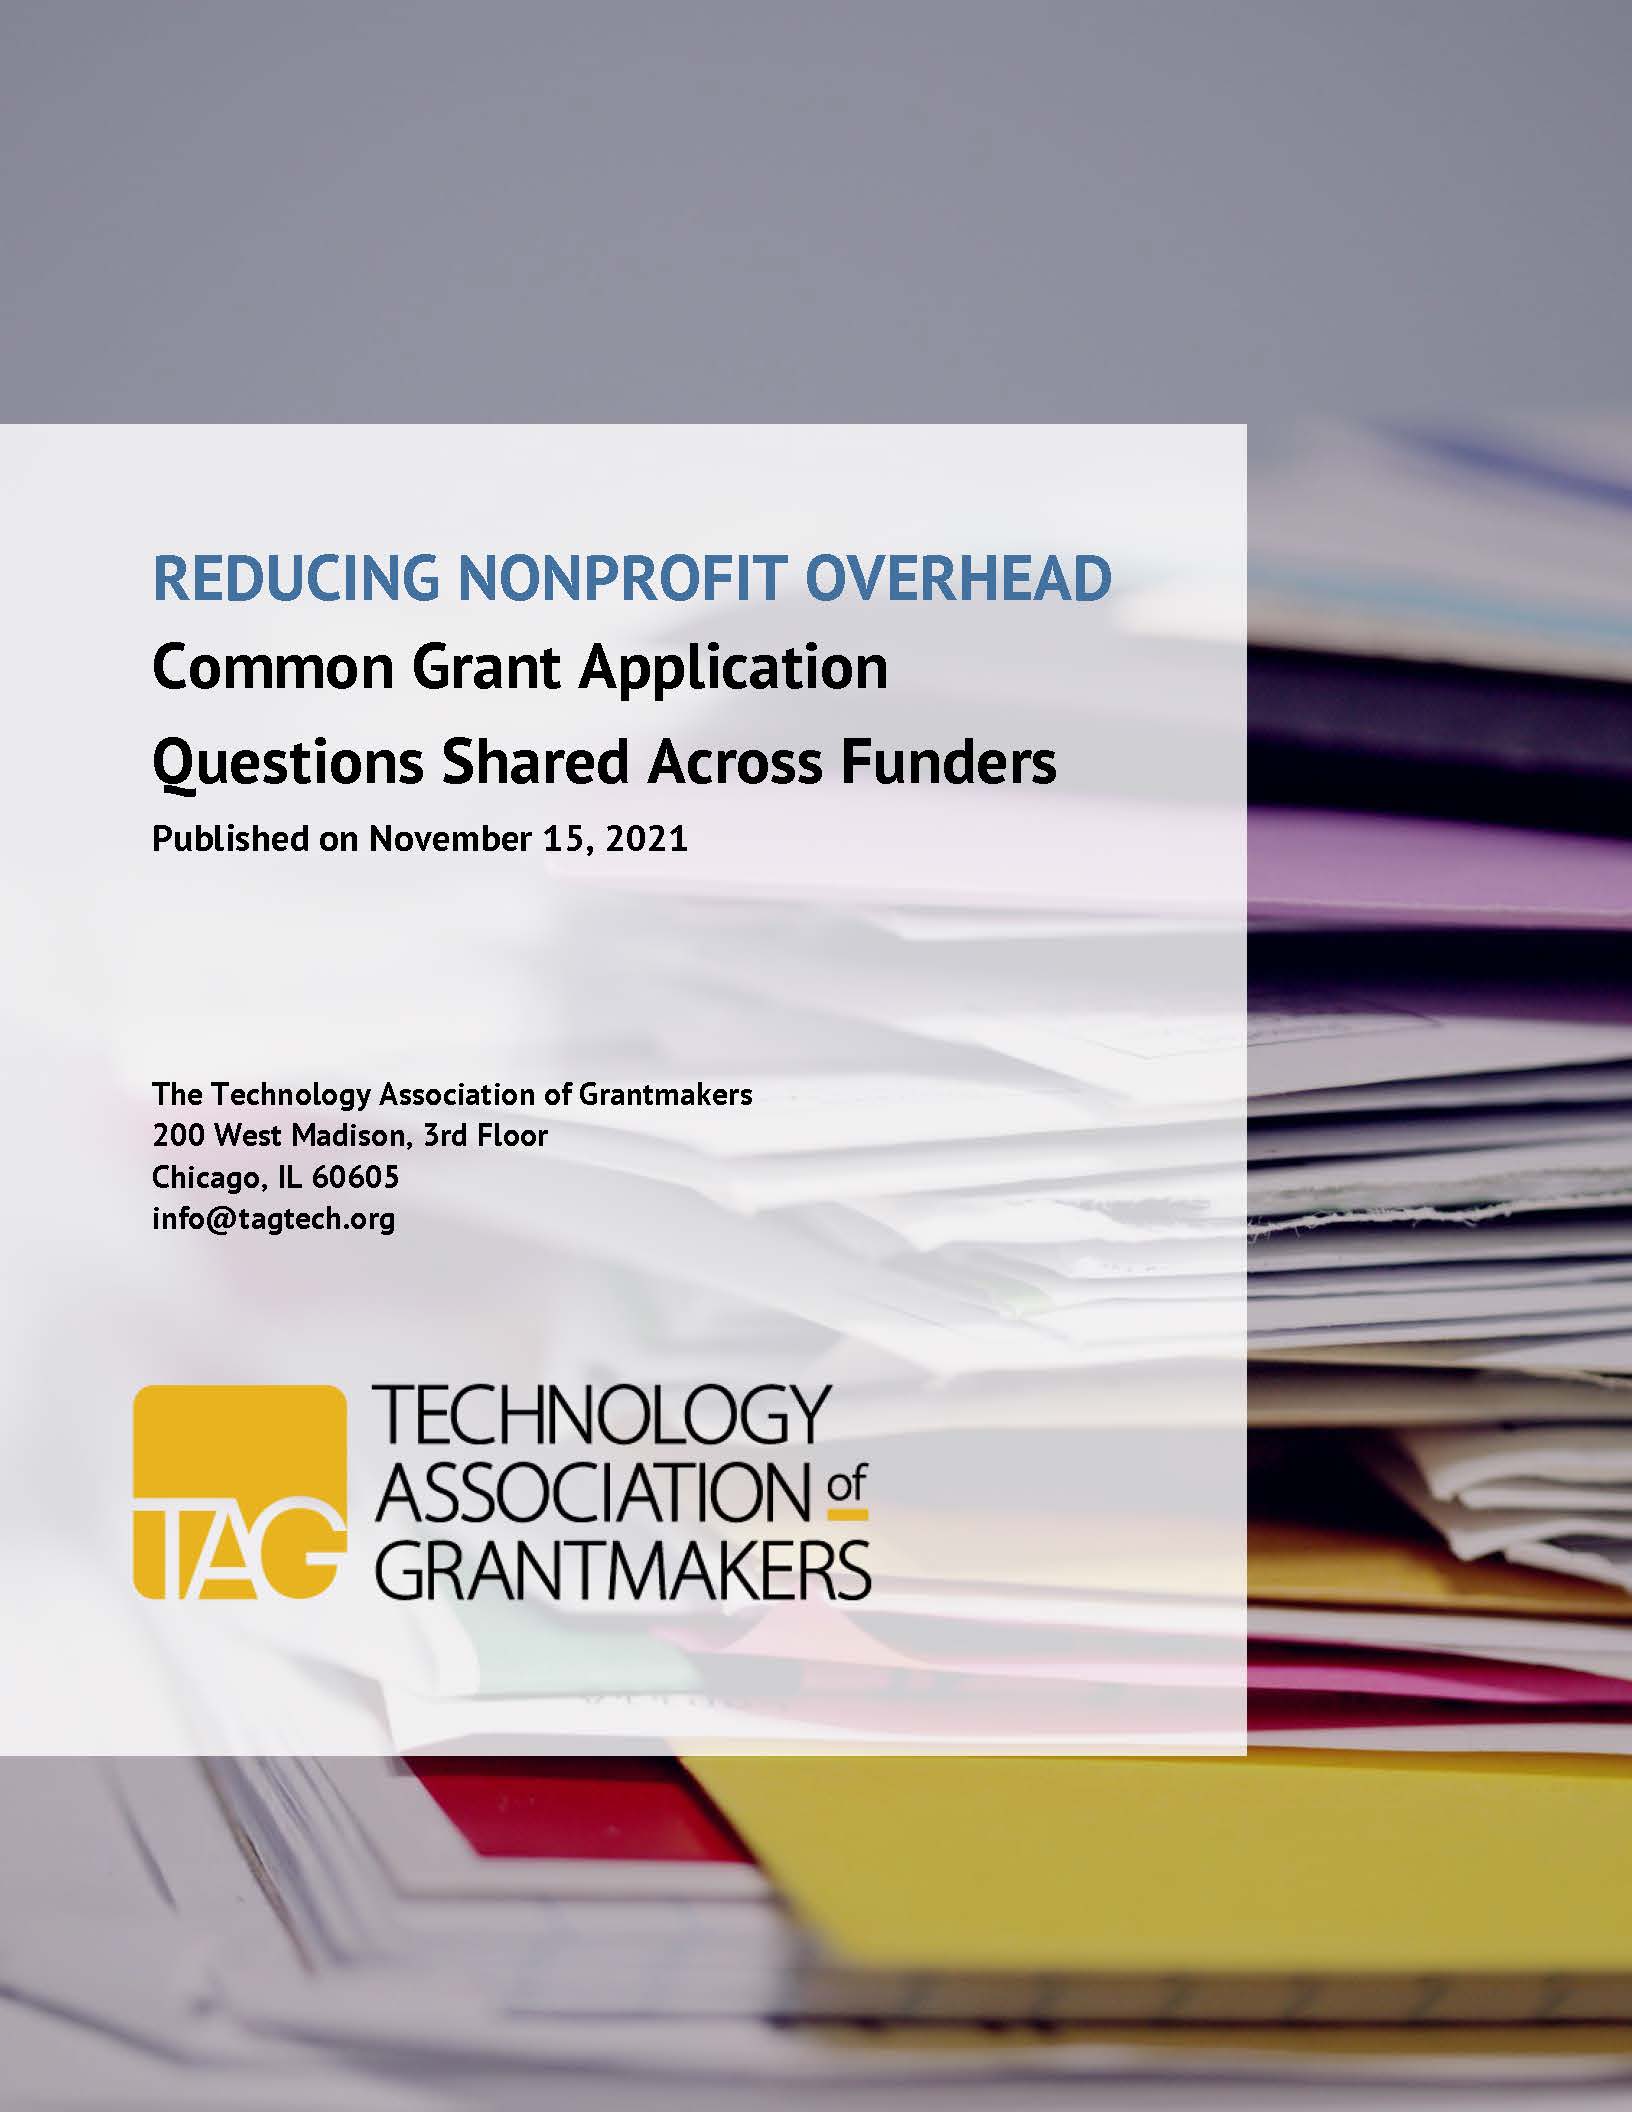 Common Grant Application Questions Shared Across Funders